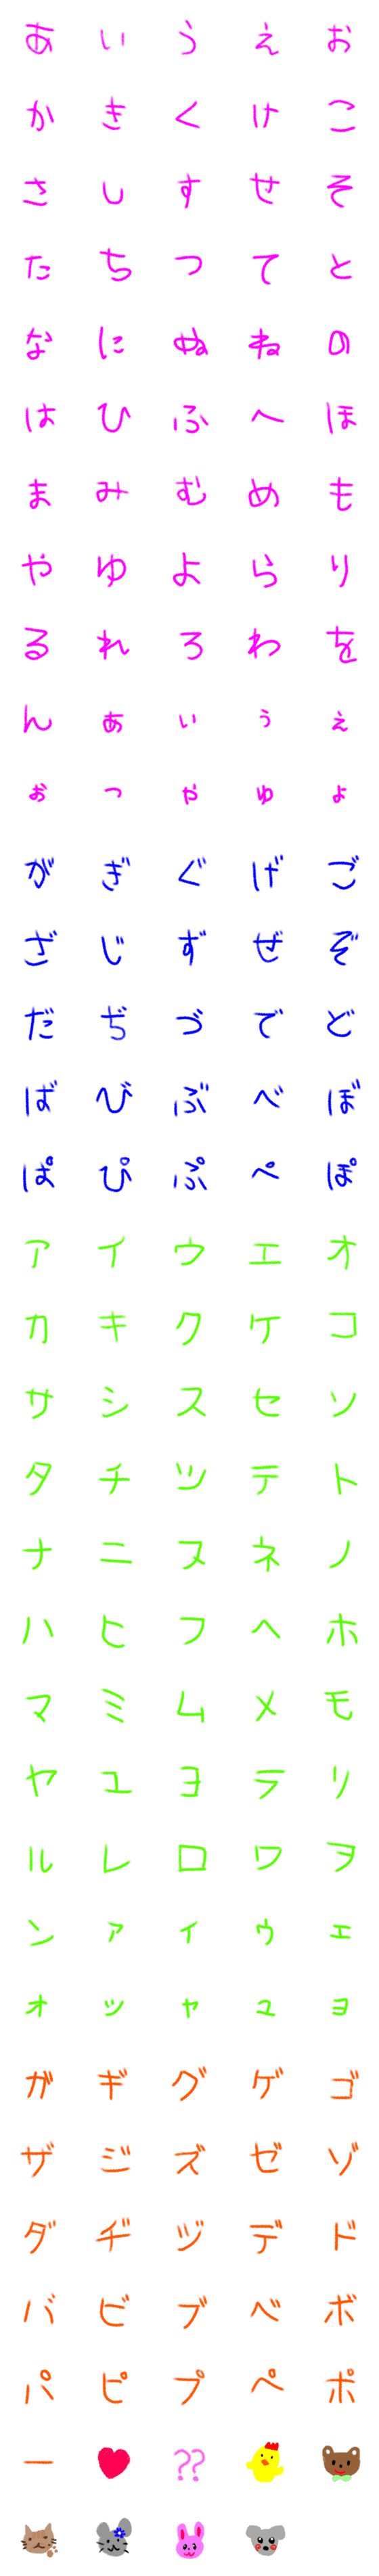 [LINE絵文字]クレヨン文字の画像一覧